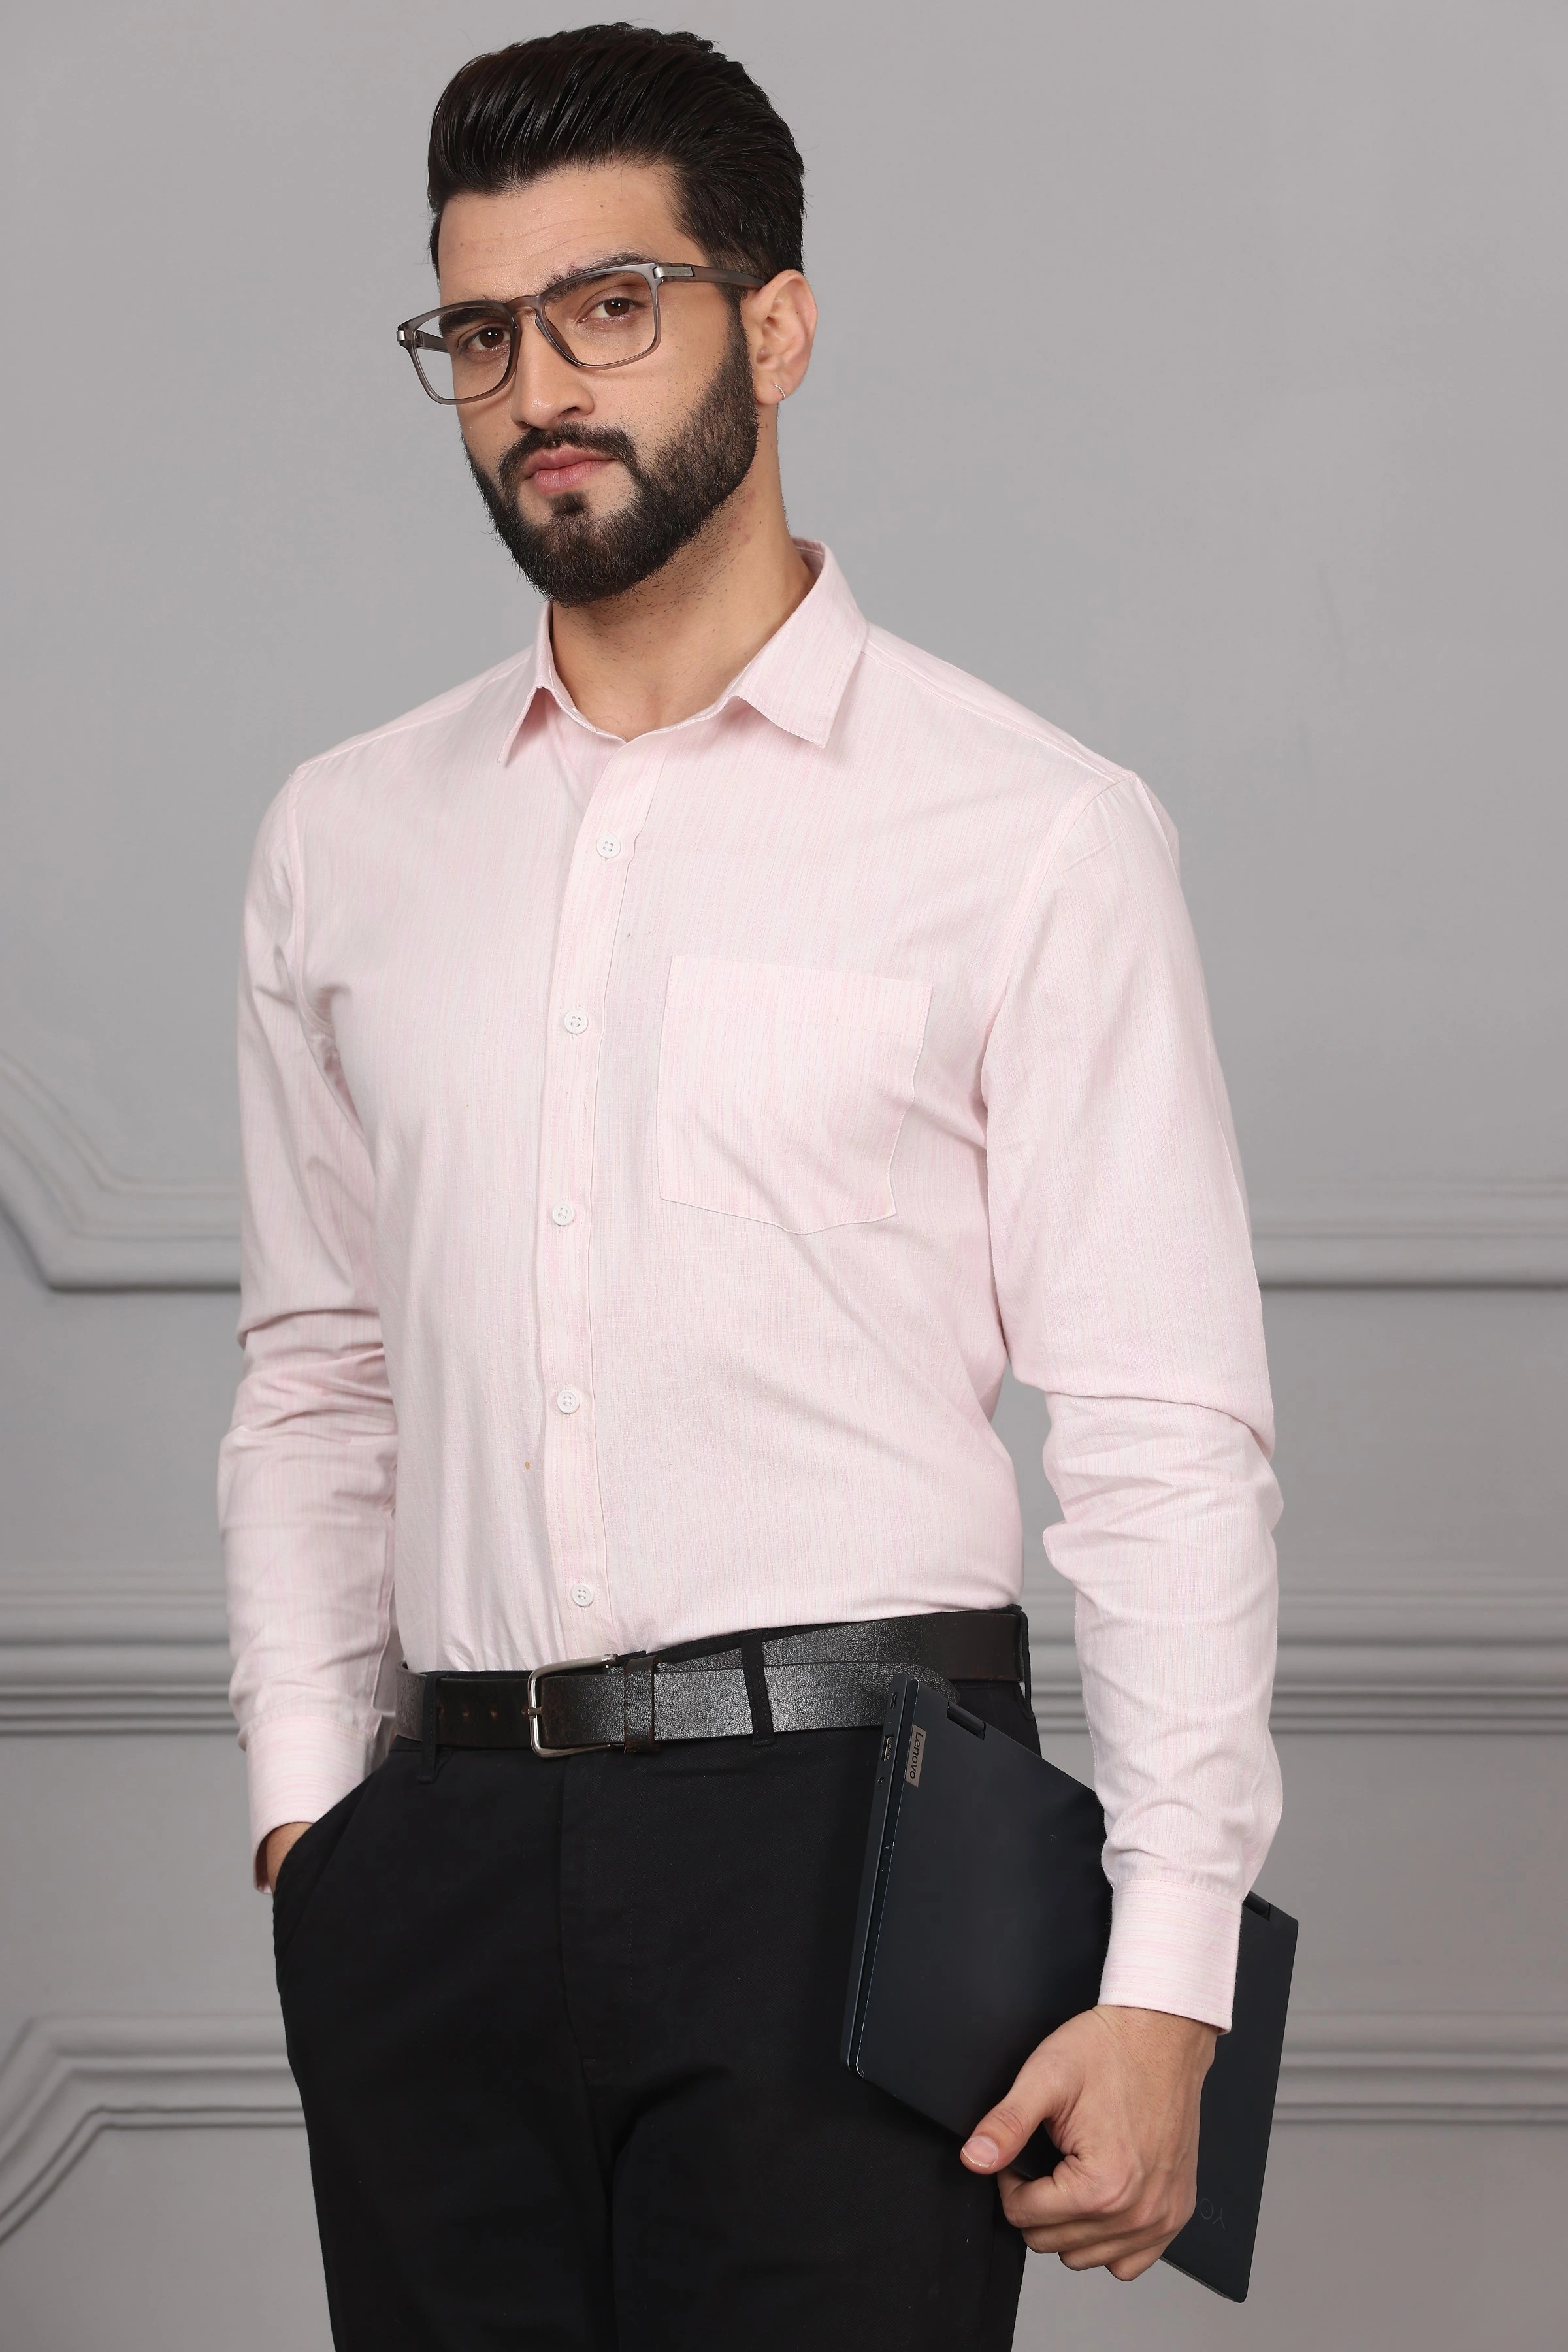 Textured Pink White Business Formal Cotton Shirt-S-4